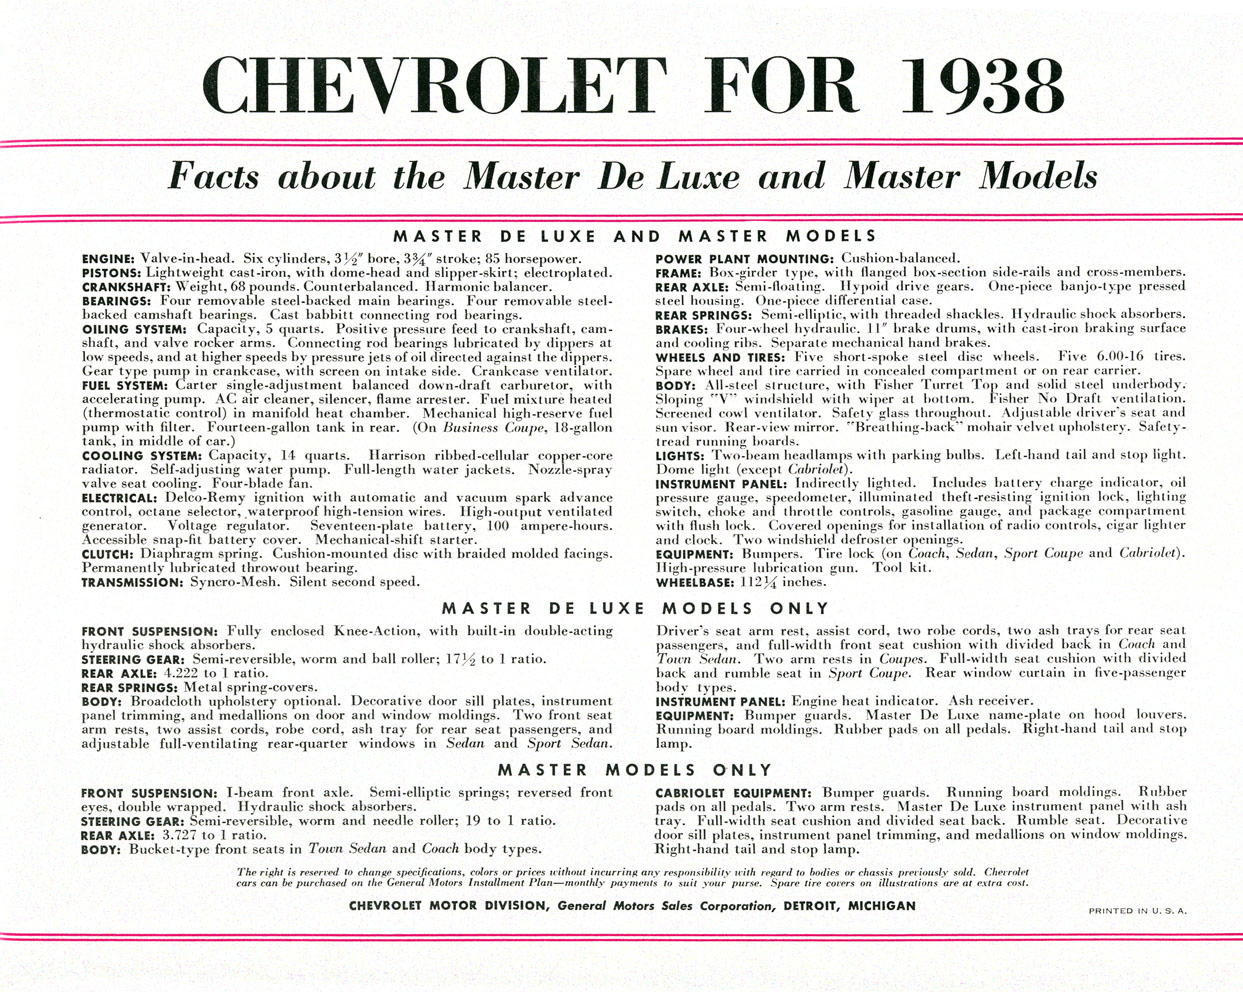 1938 Chevrolet Brochure Page 14